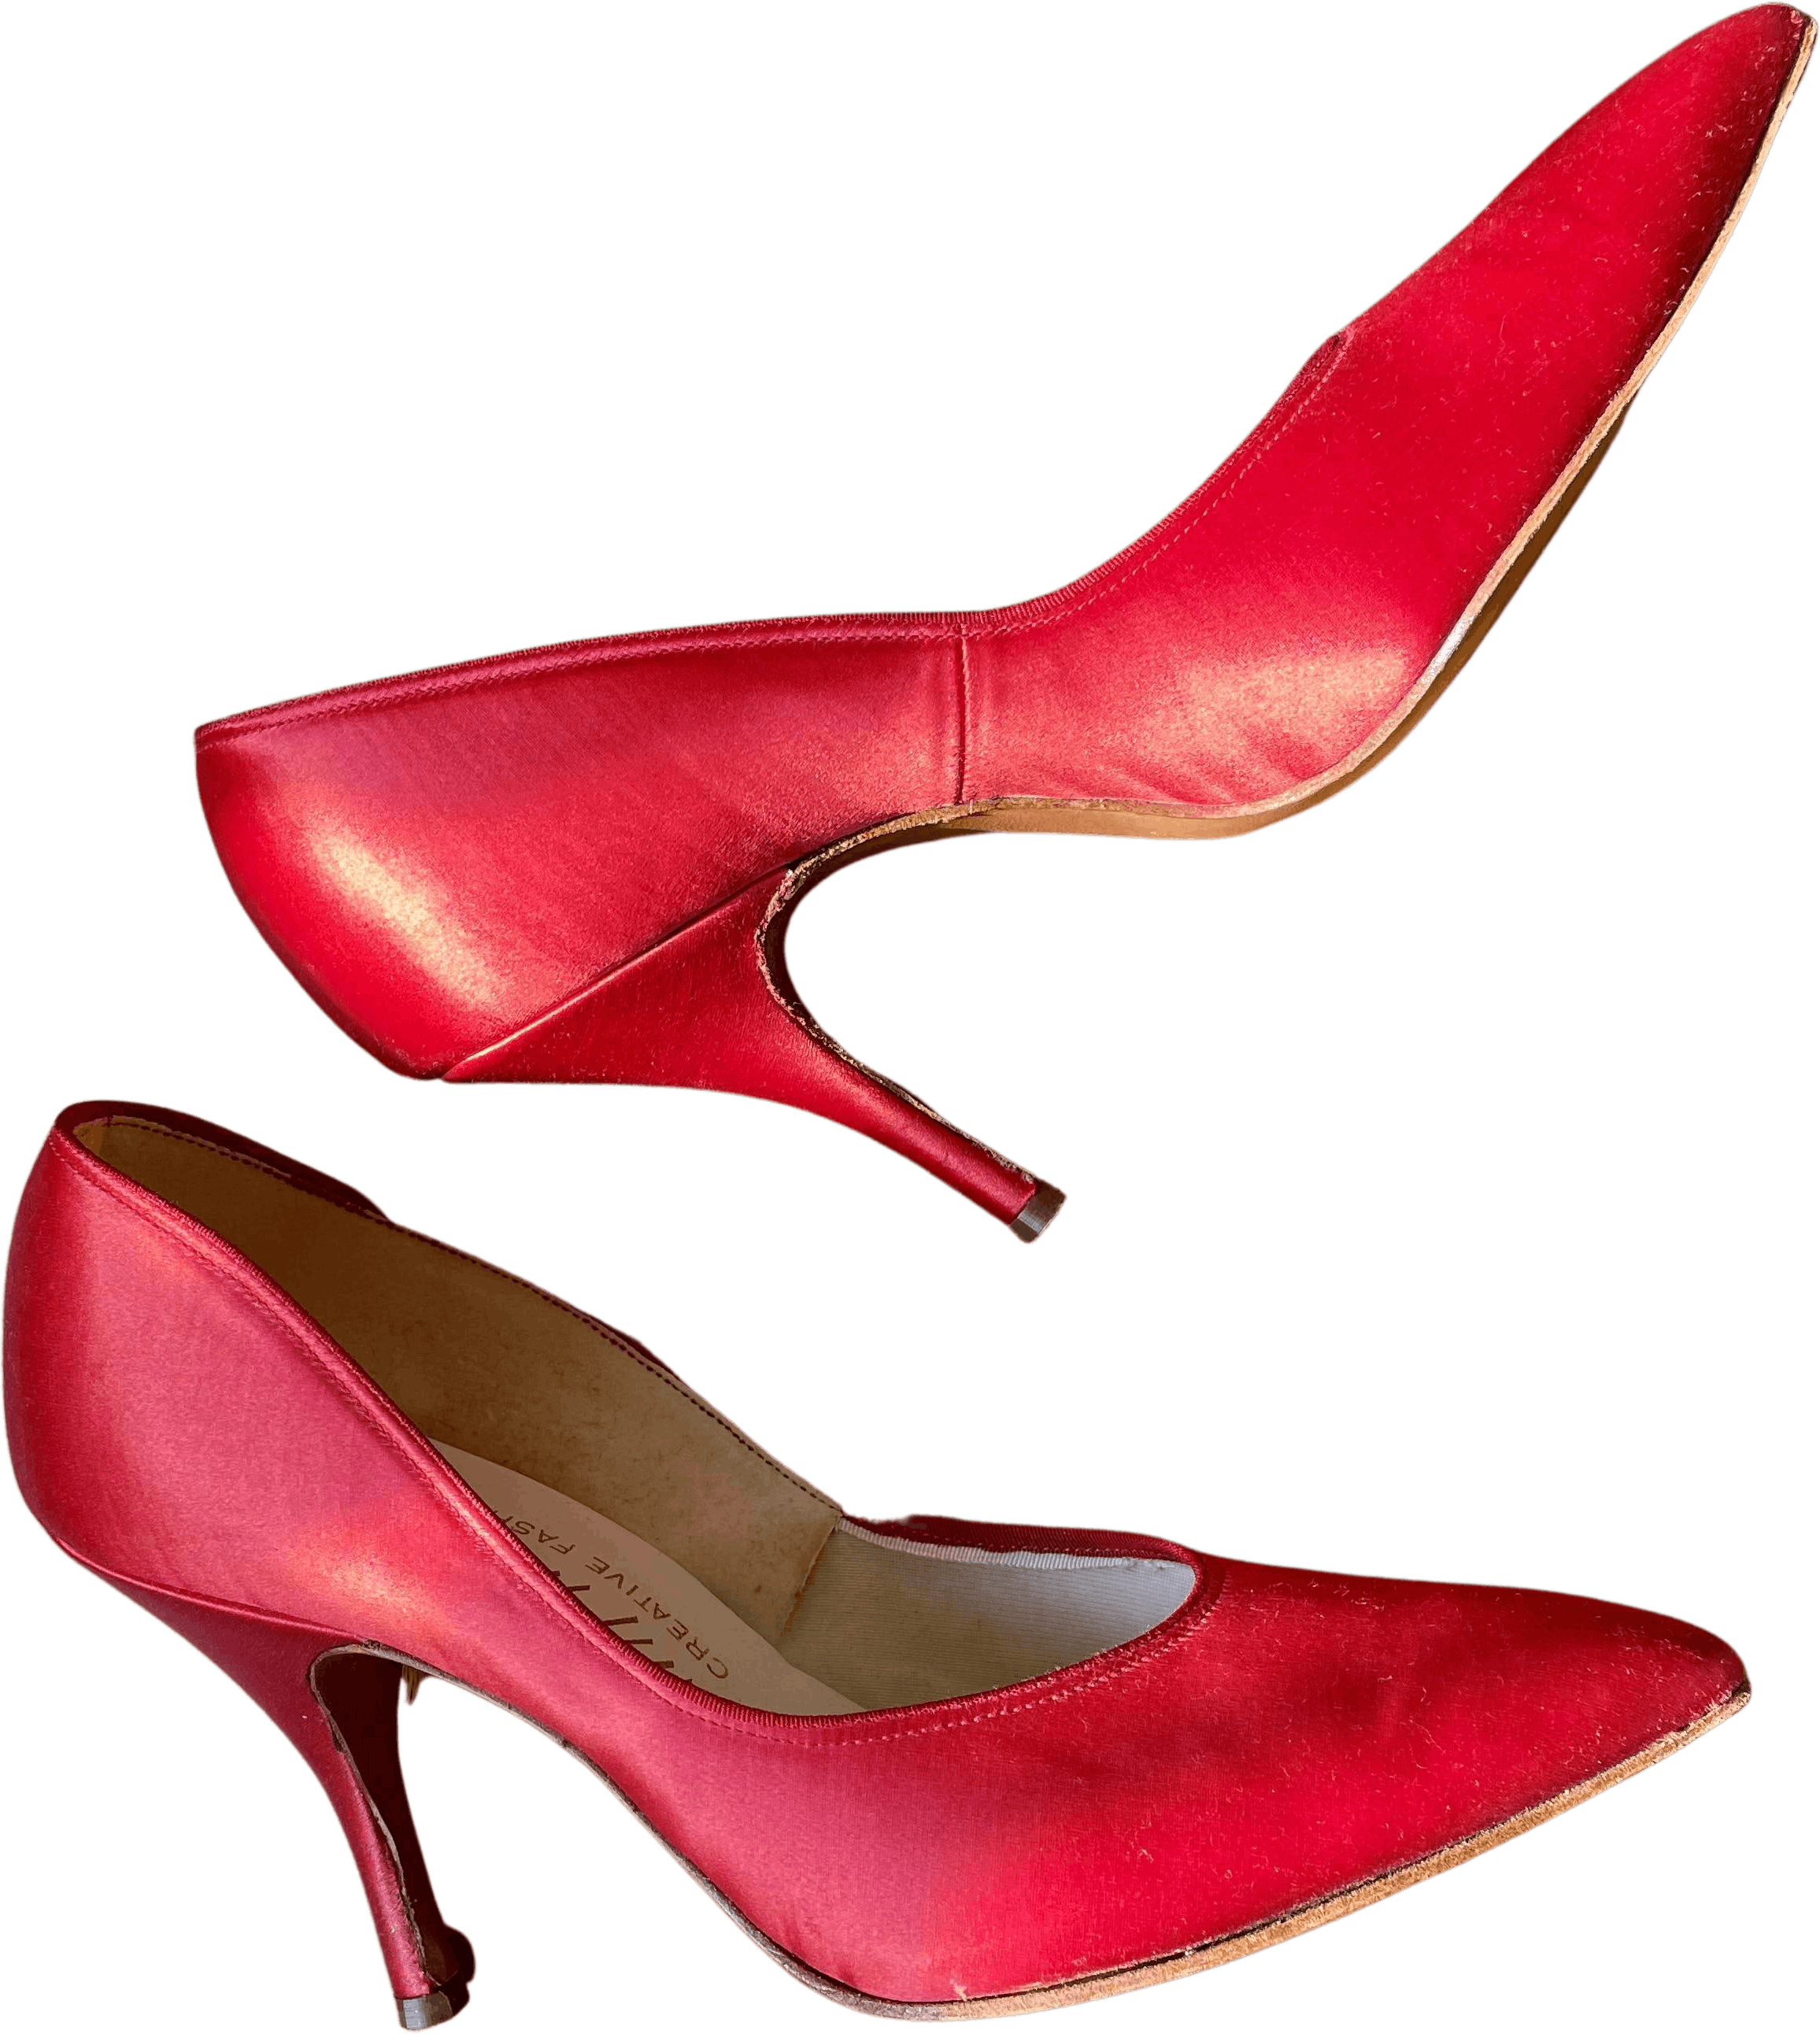 Vintage 80’s Hot Red Pumps with Thin Stiletto Heel | Shop THRILLING